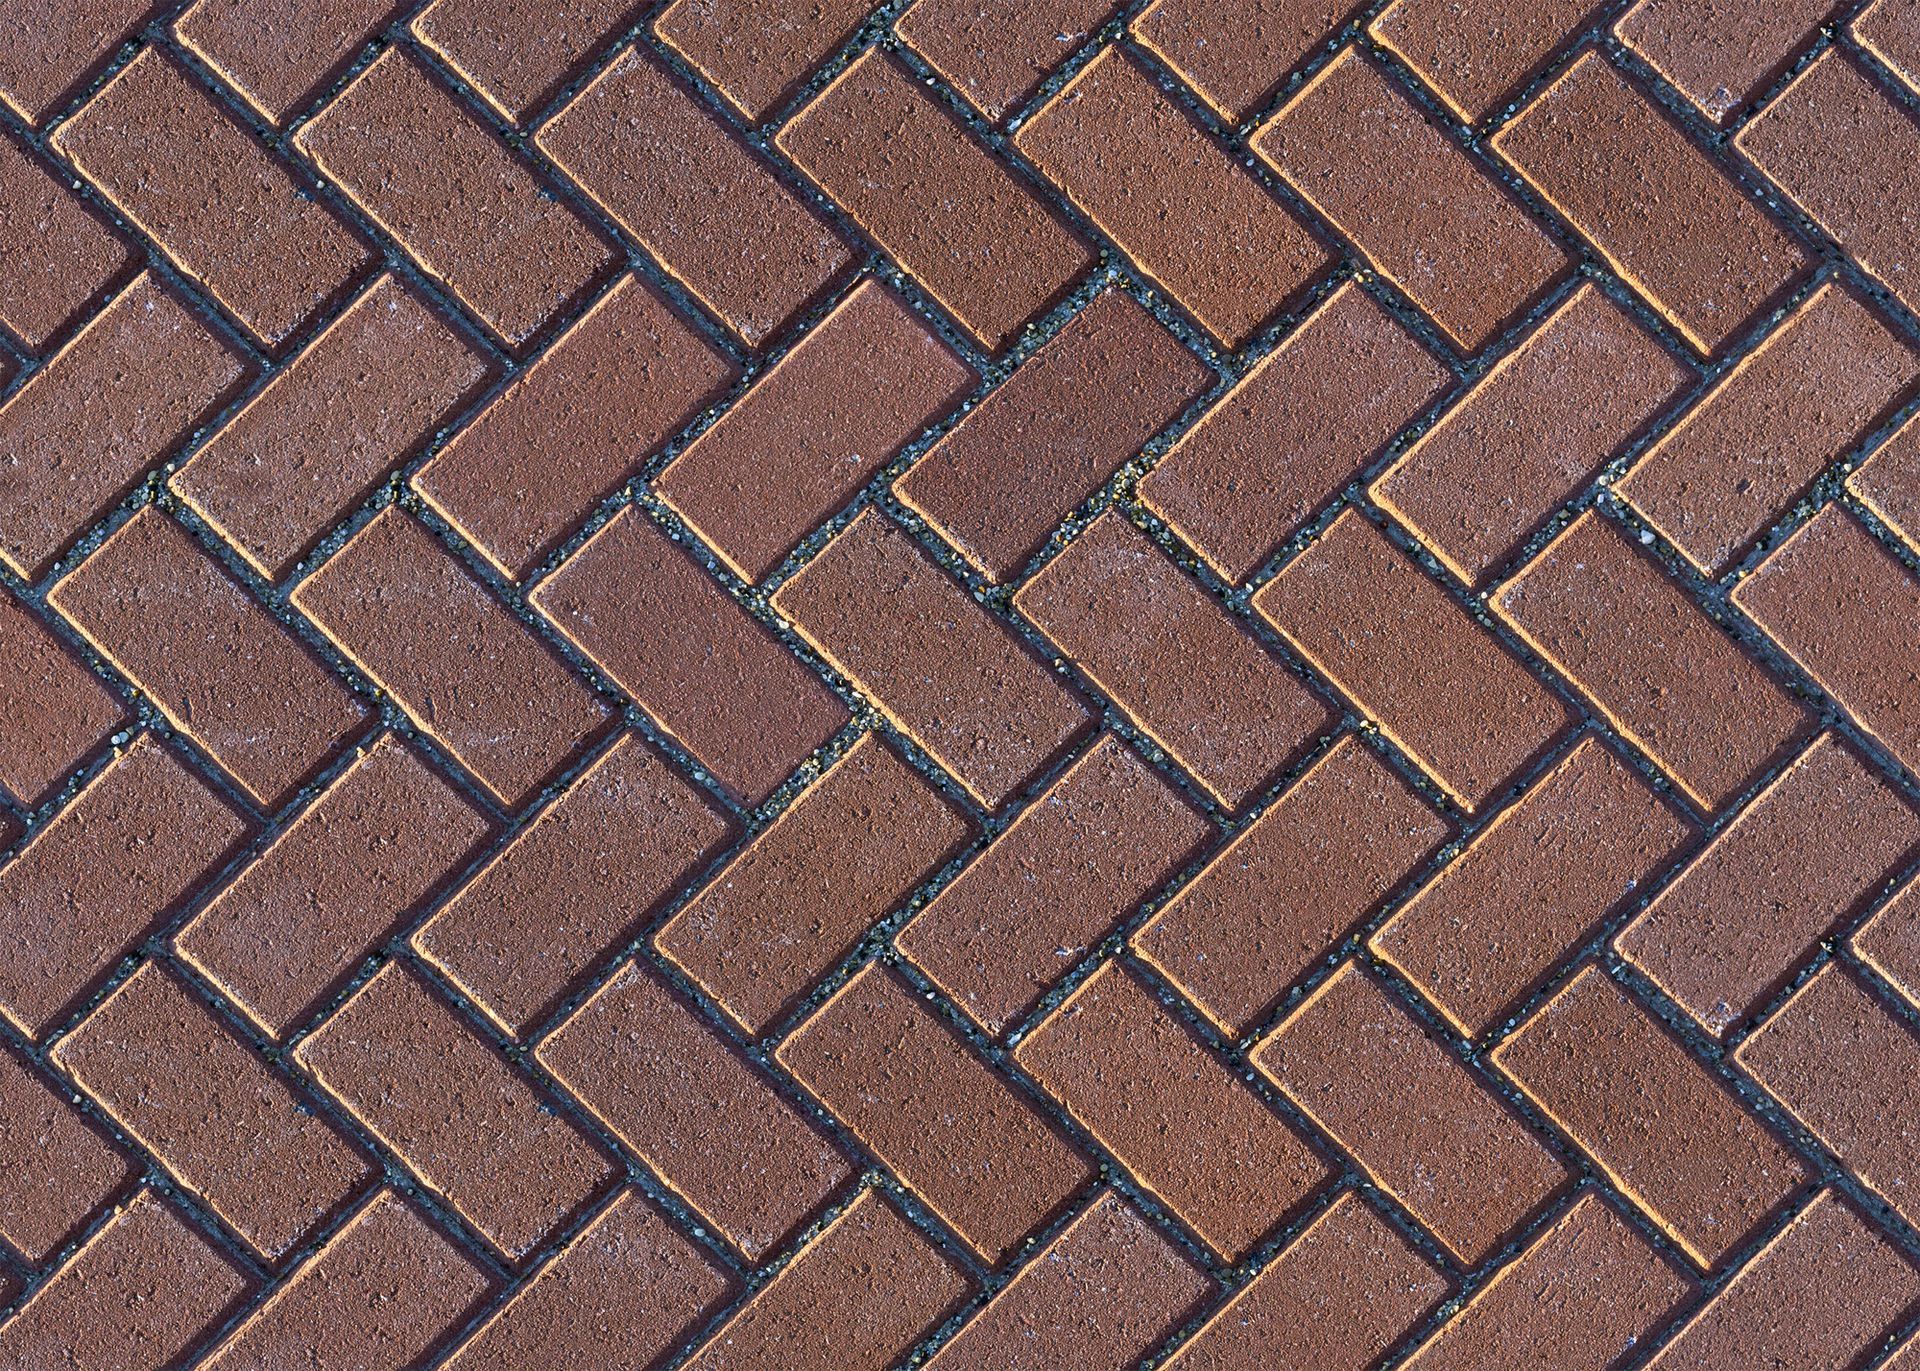 A brick paver (flooring) pattern that repeats seamlessly. 